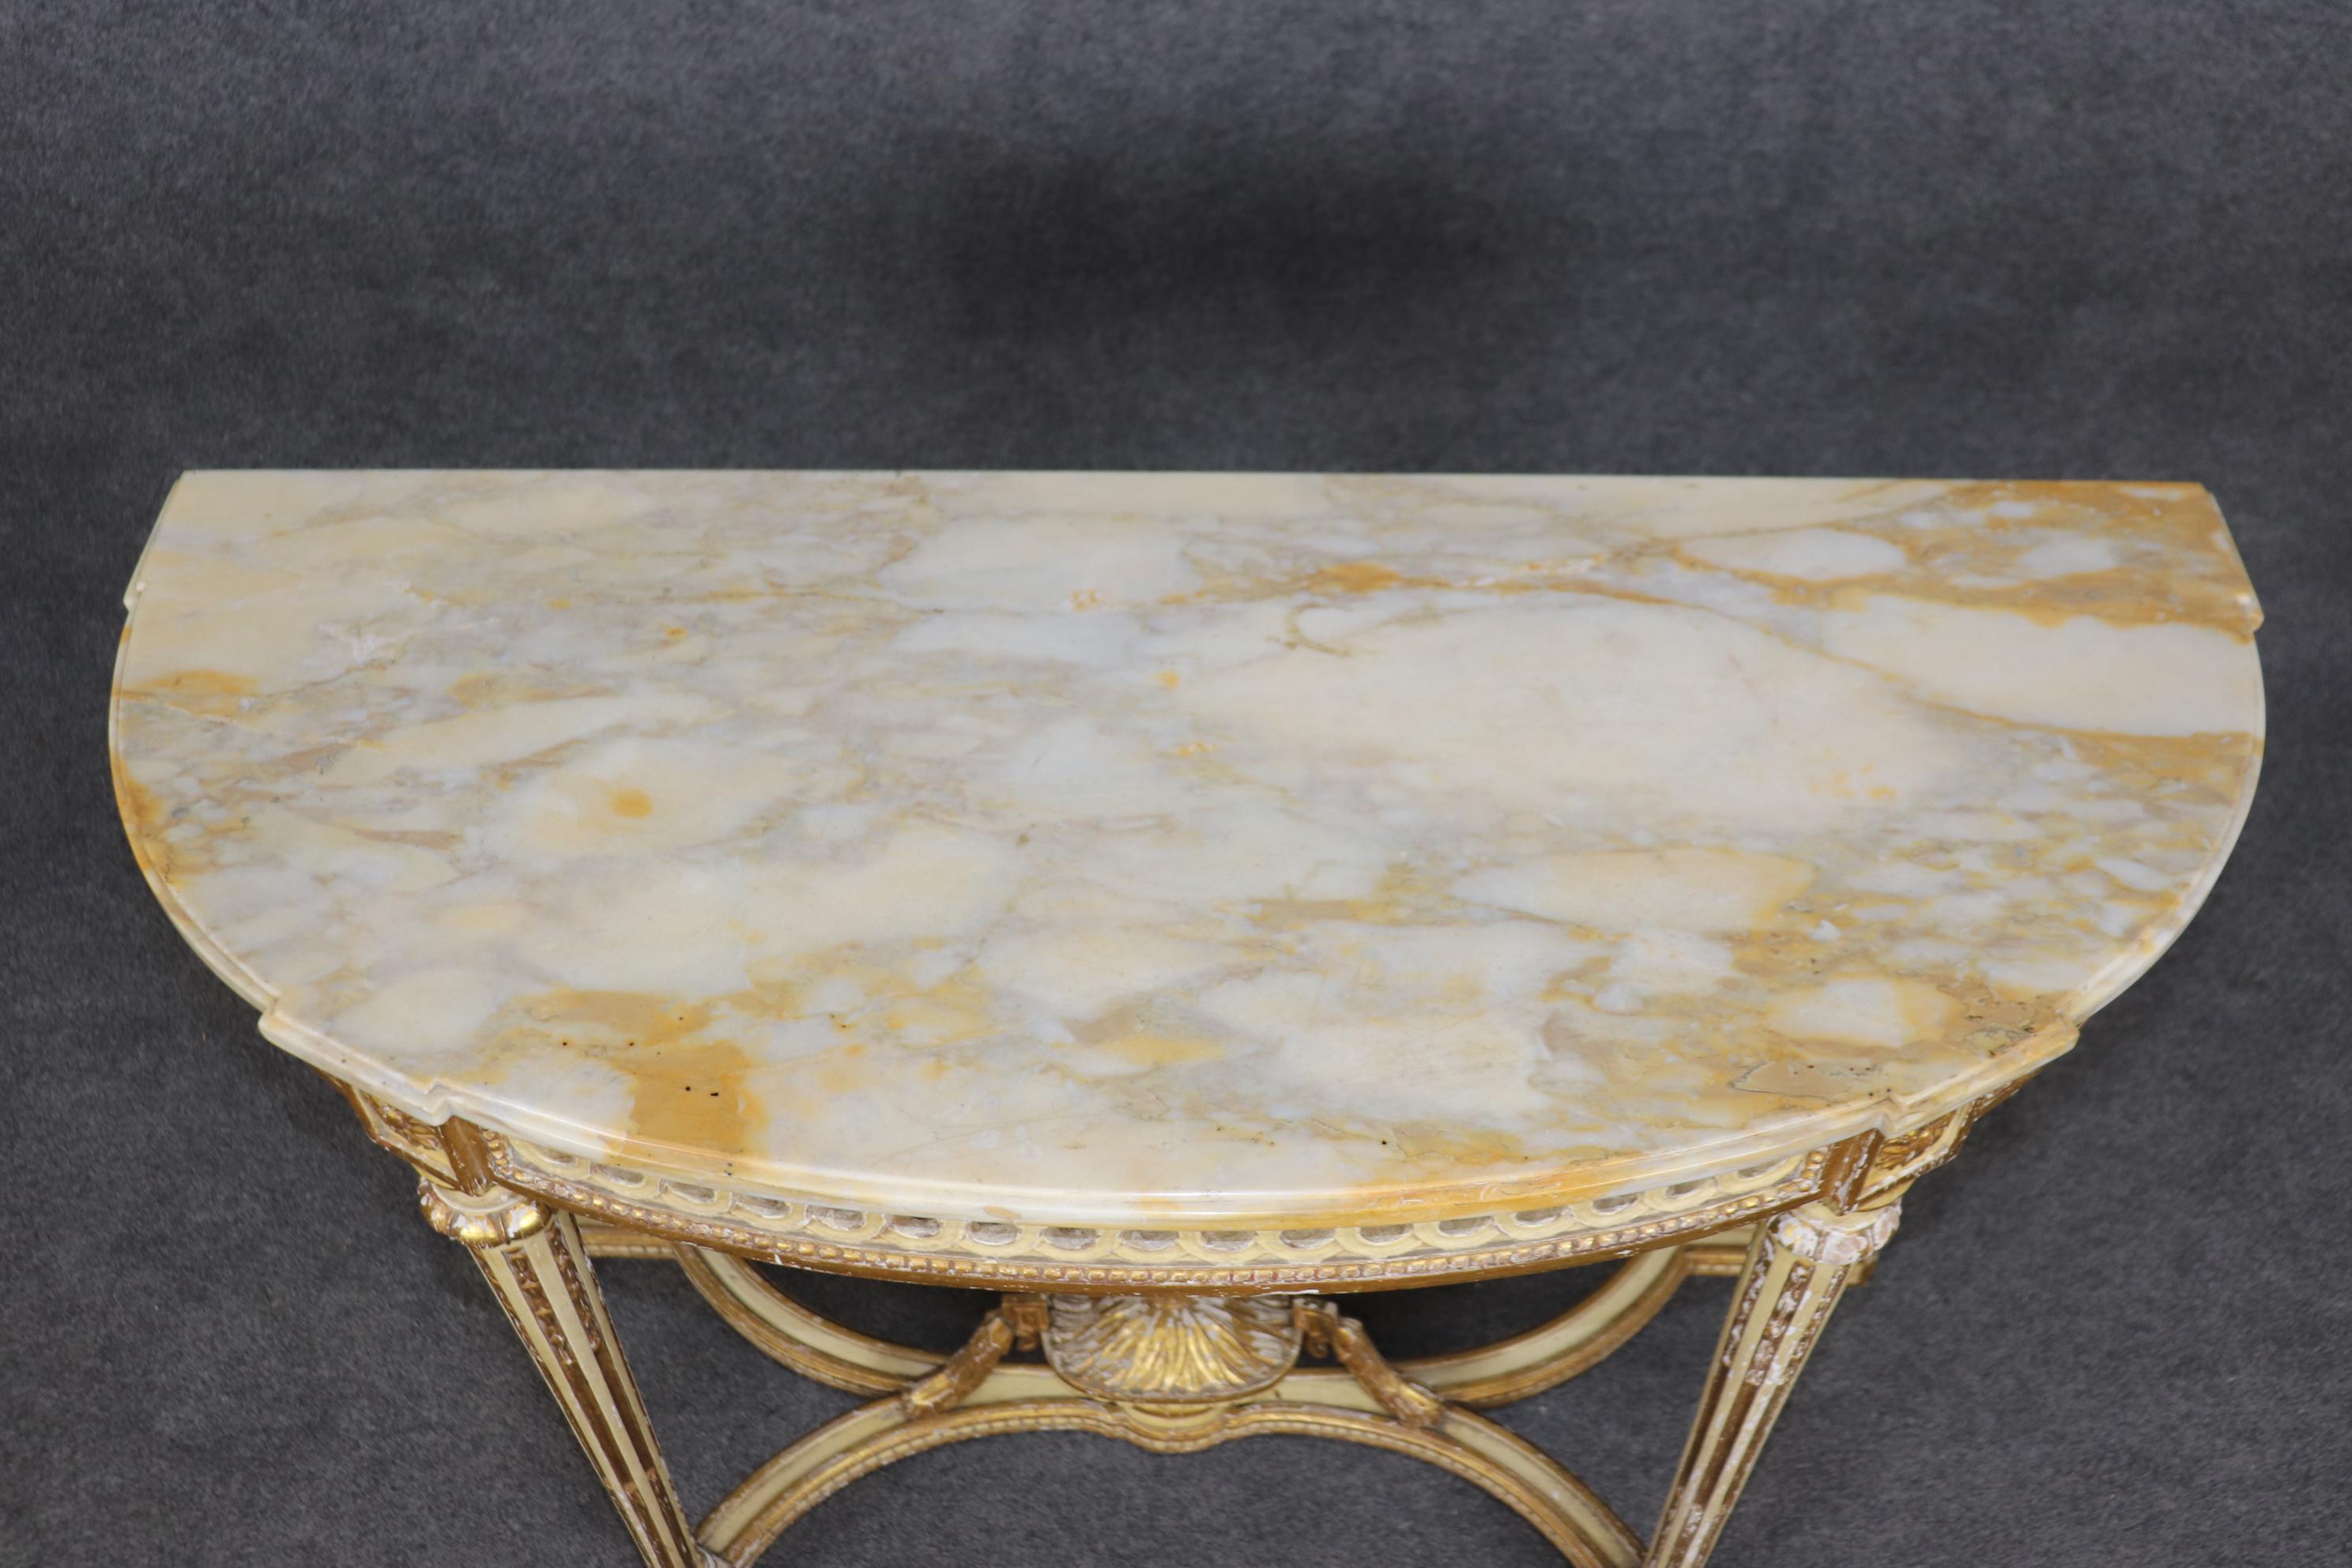 This is a classic and stunning distressed from time, gilded and painted console or demilune table with a fine marble top. The table is in its original fiinsh and would be considered good original condition. Measures 35.25 tall x 46.5 wide x 19